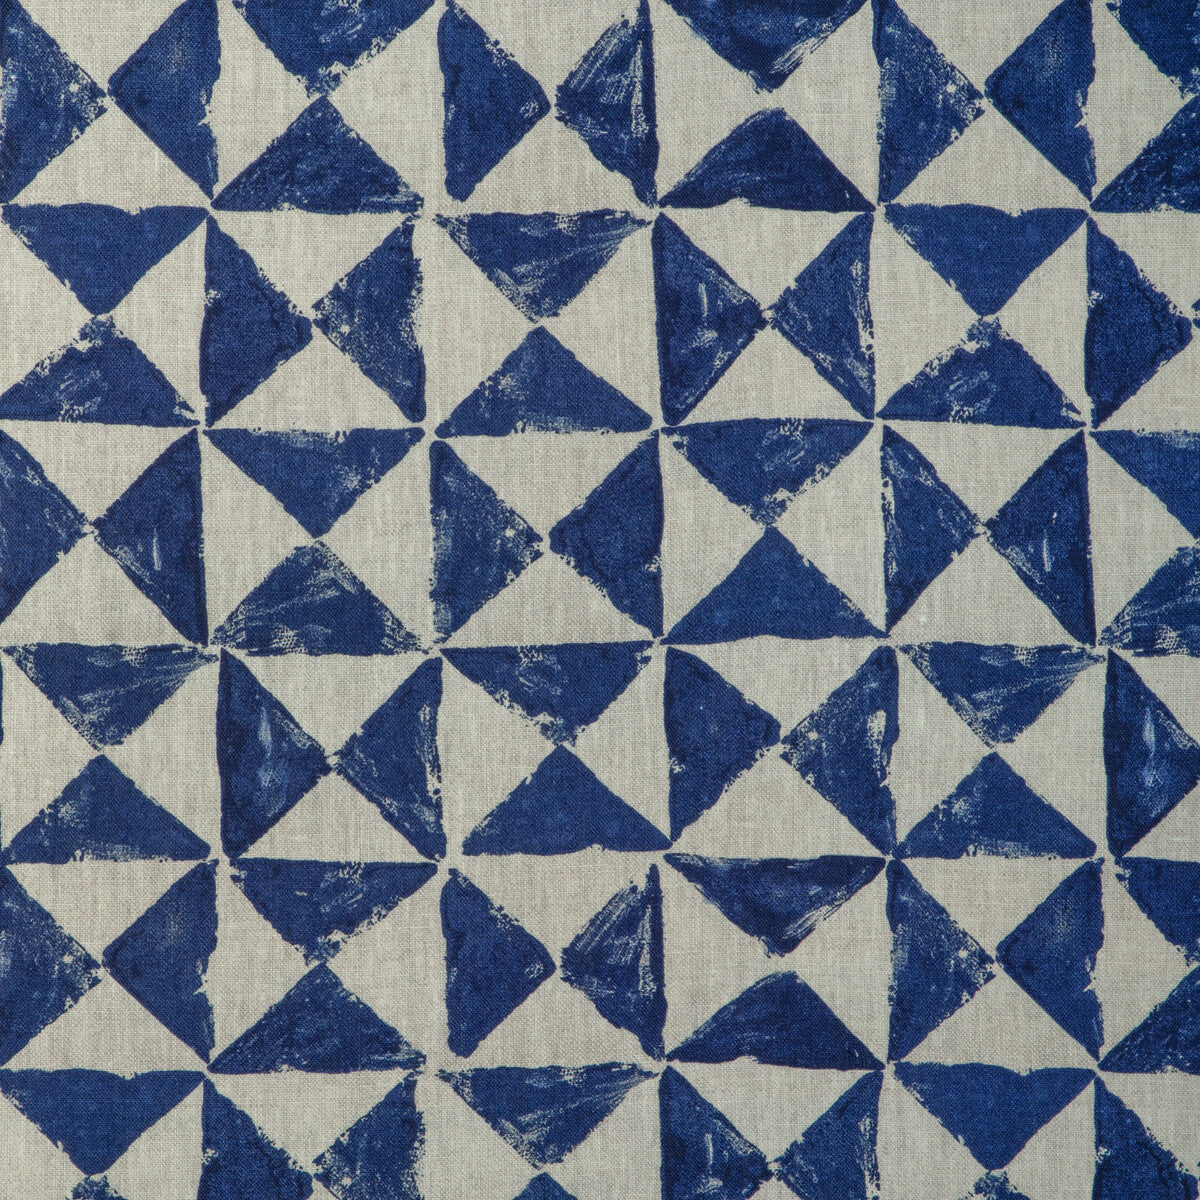 Triquad fabric in indigo color - pattern TRIQUAD.51.0 - by Kravet Basics in the Small Scale Prints collection